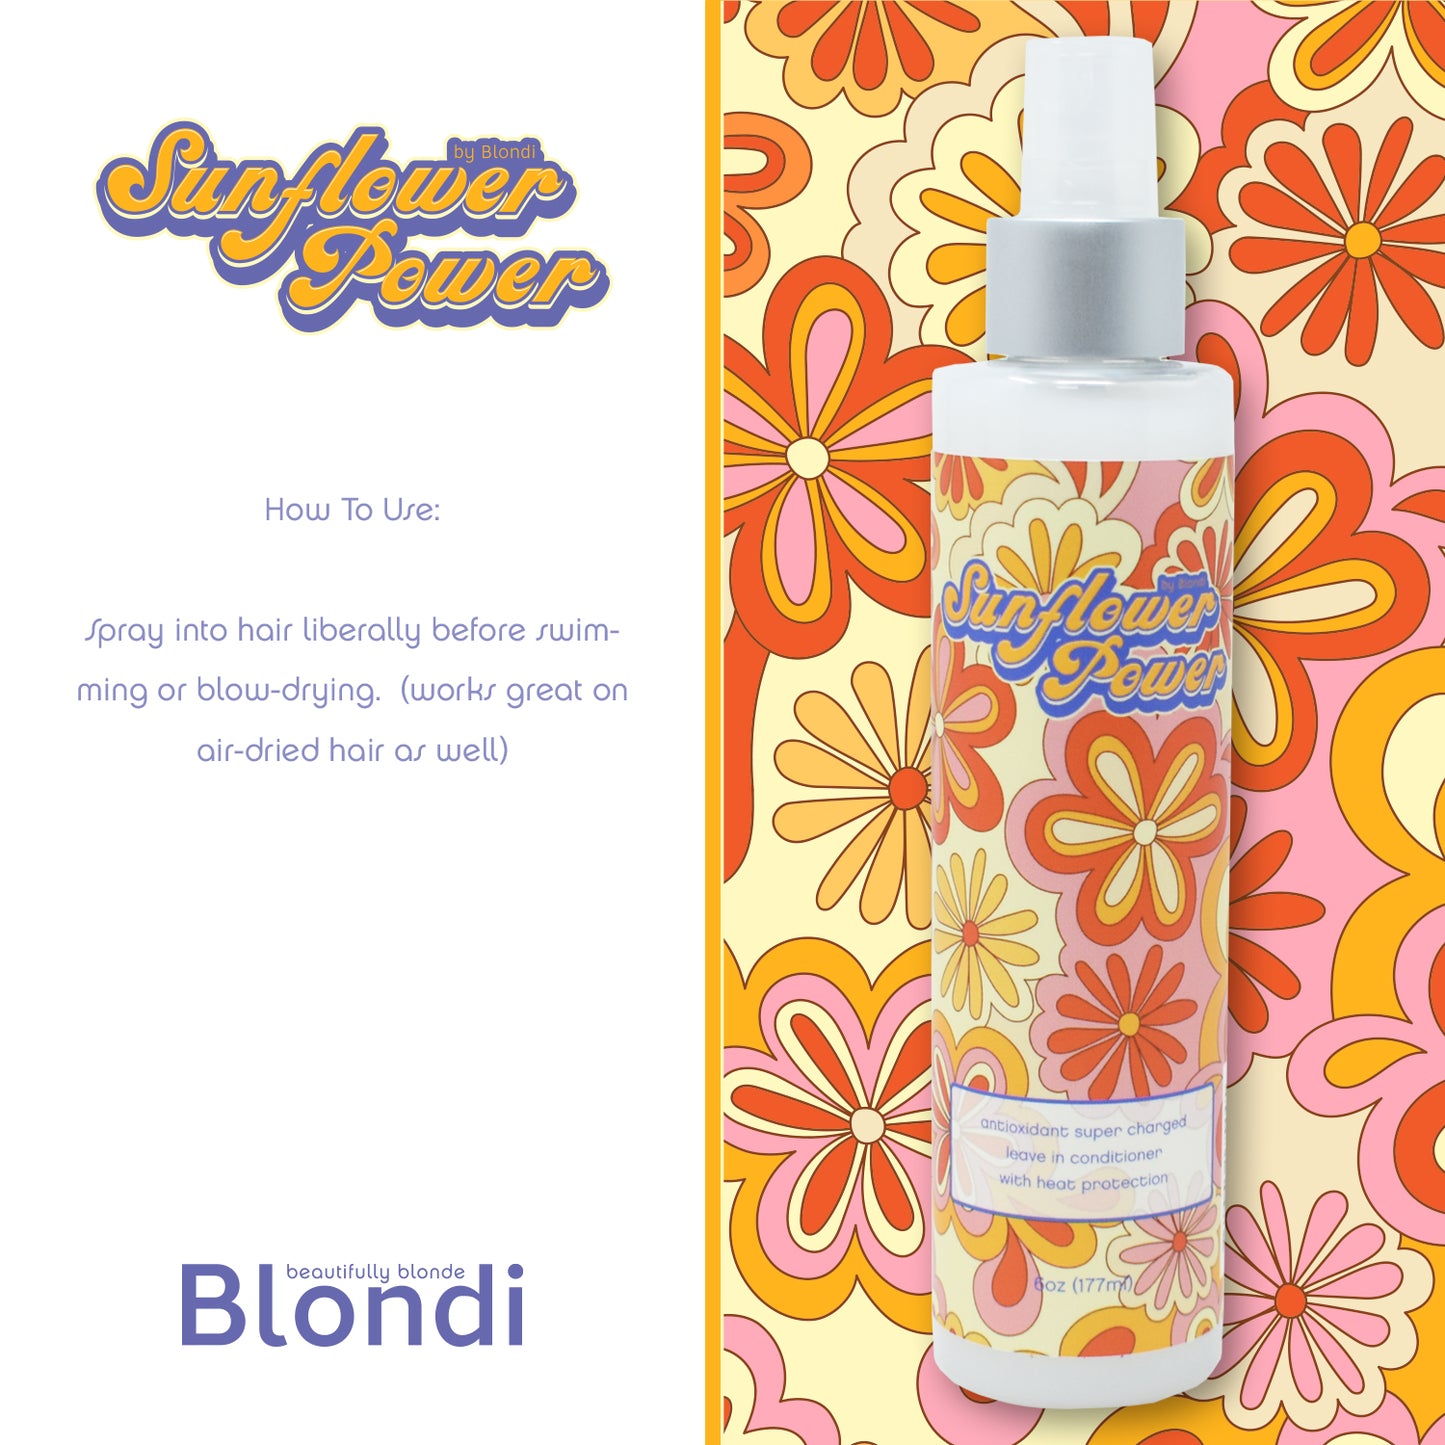 Blondi Sunflower Power Antioxidant Super Charged Leave In Conditioner With Heat Protection